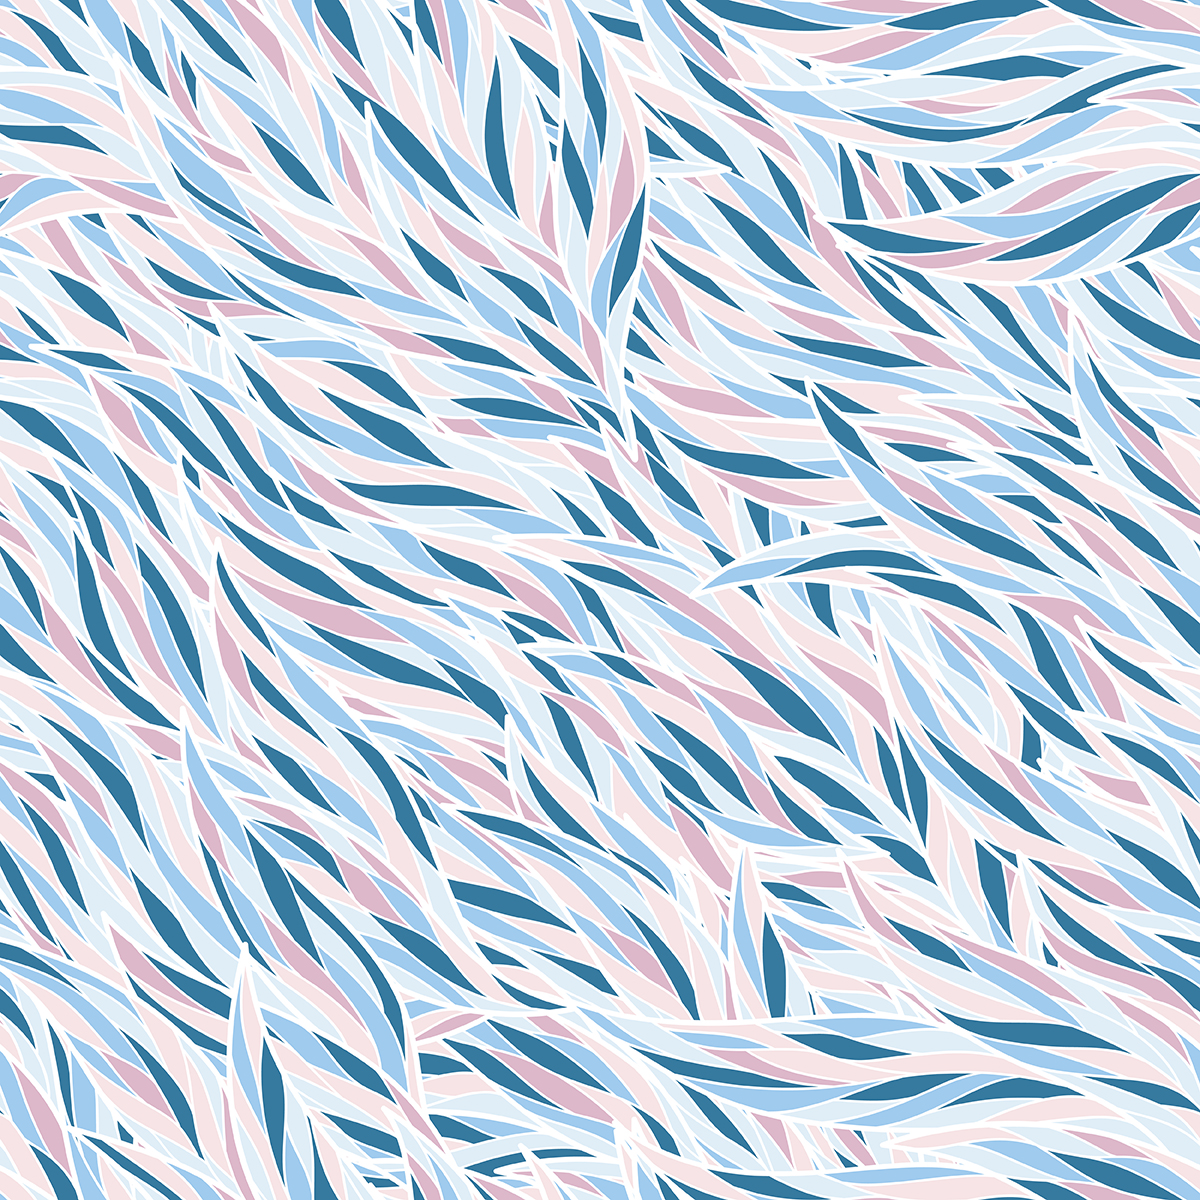 A pattern of blue and pink waves